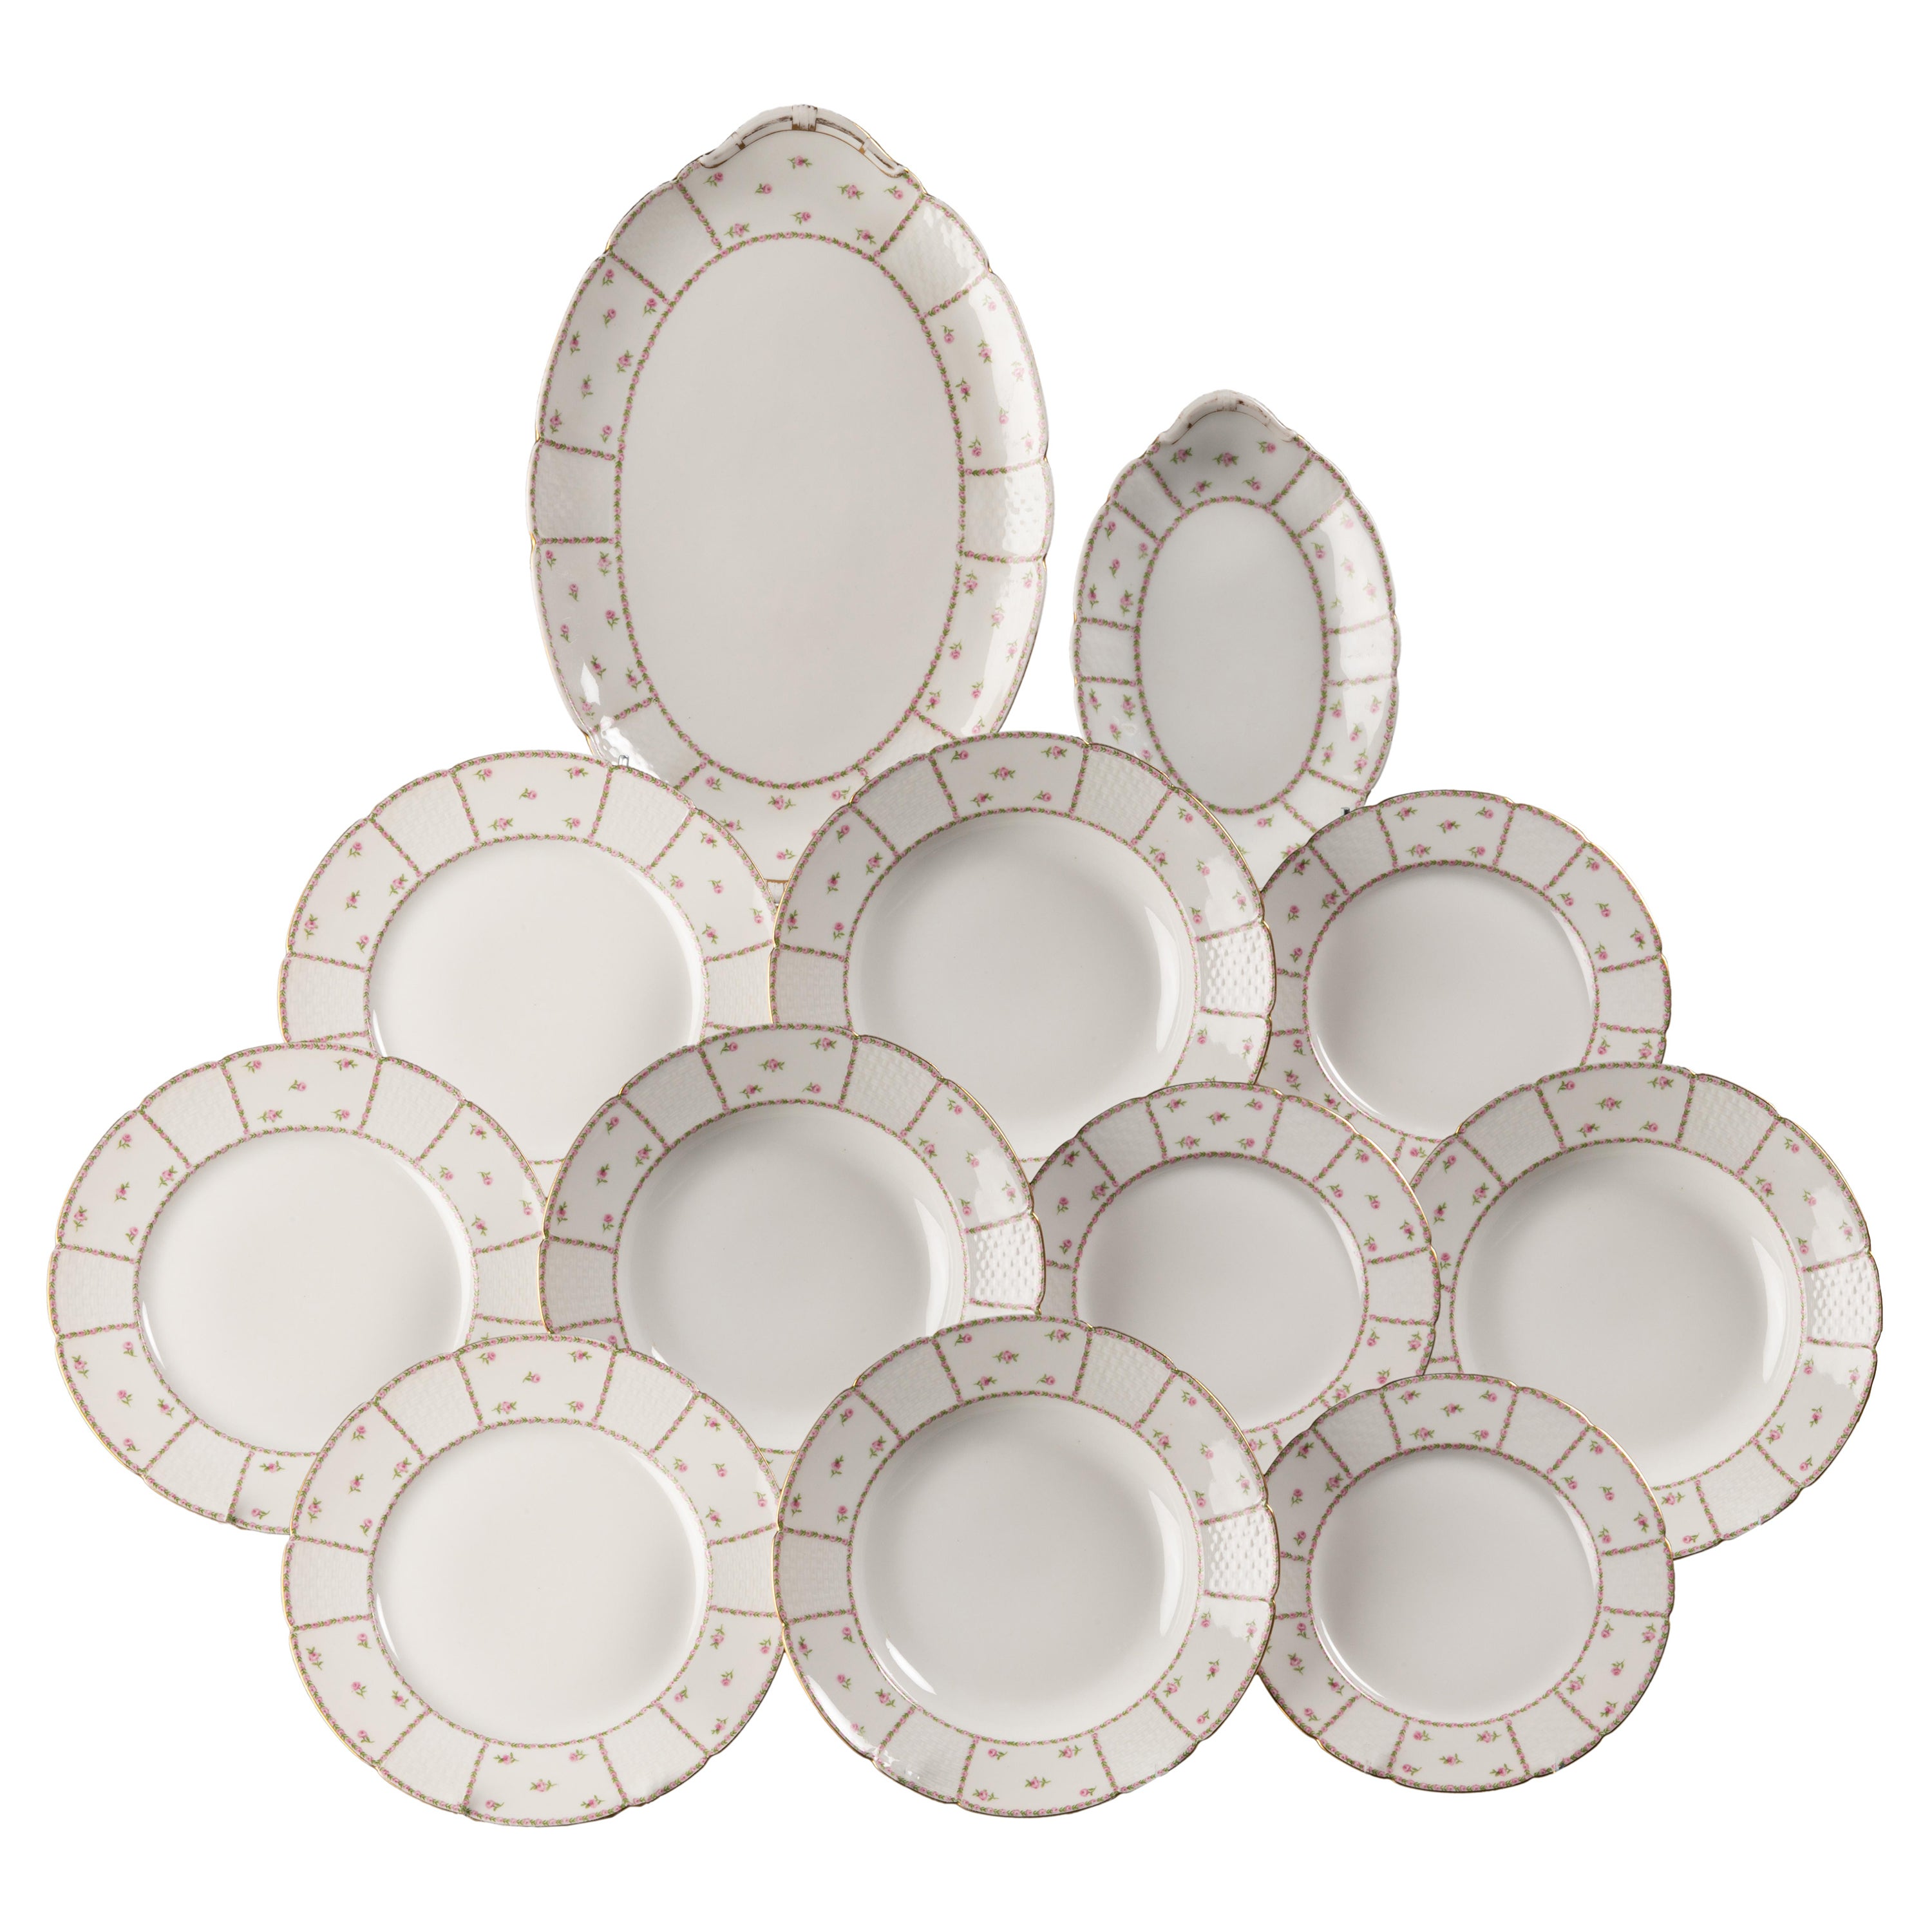 Limoges 34 Pieces Tableware in Very Fine Porcelain by GOA